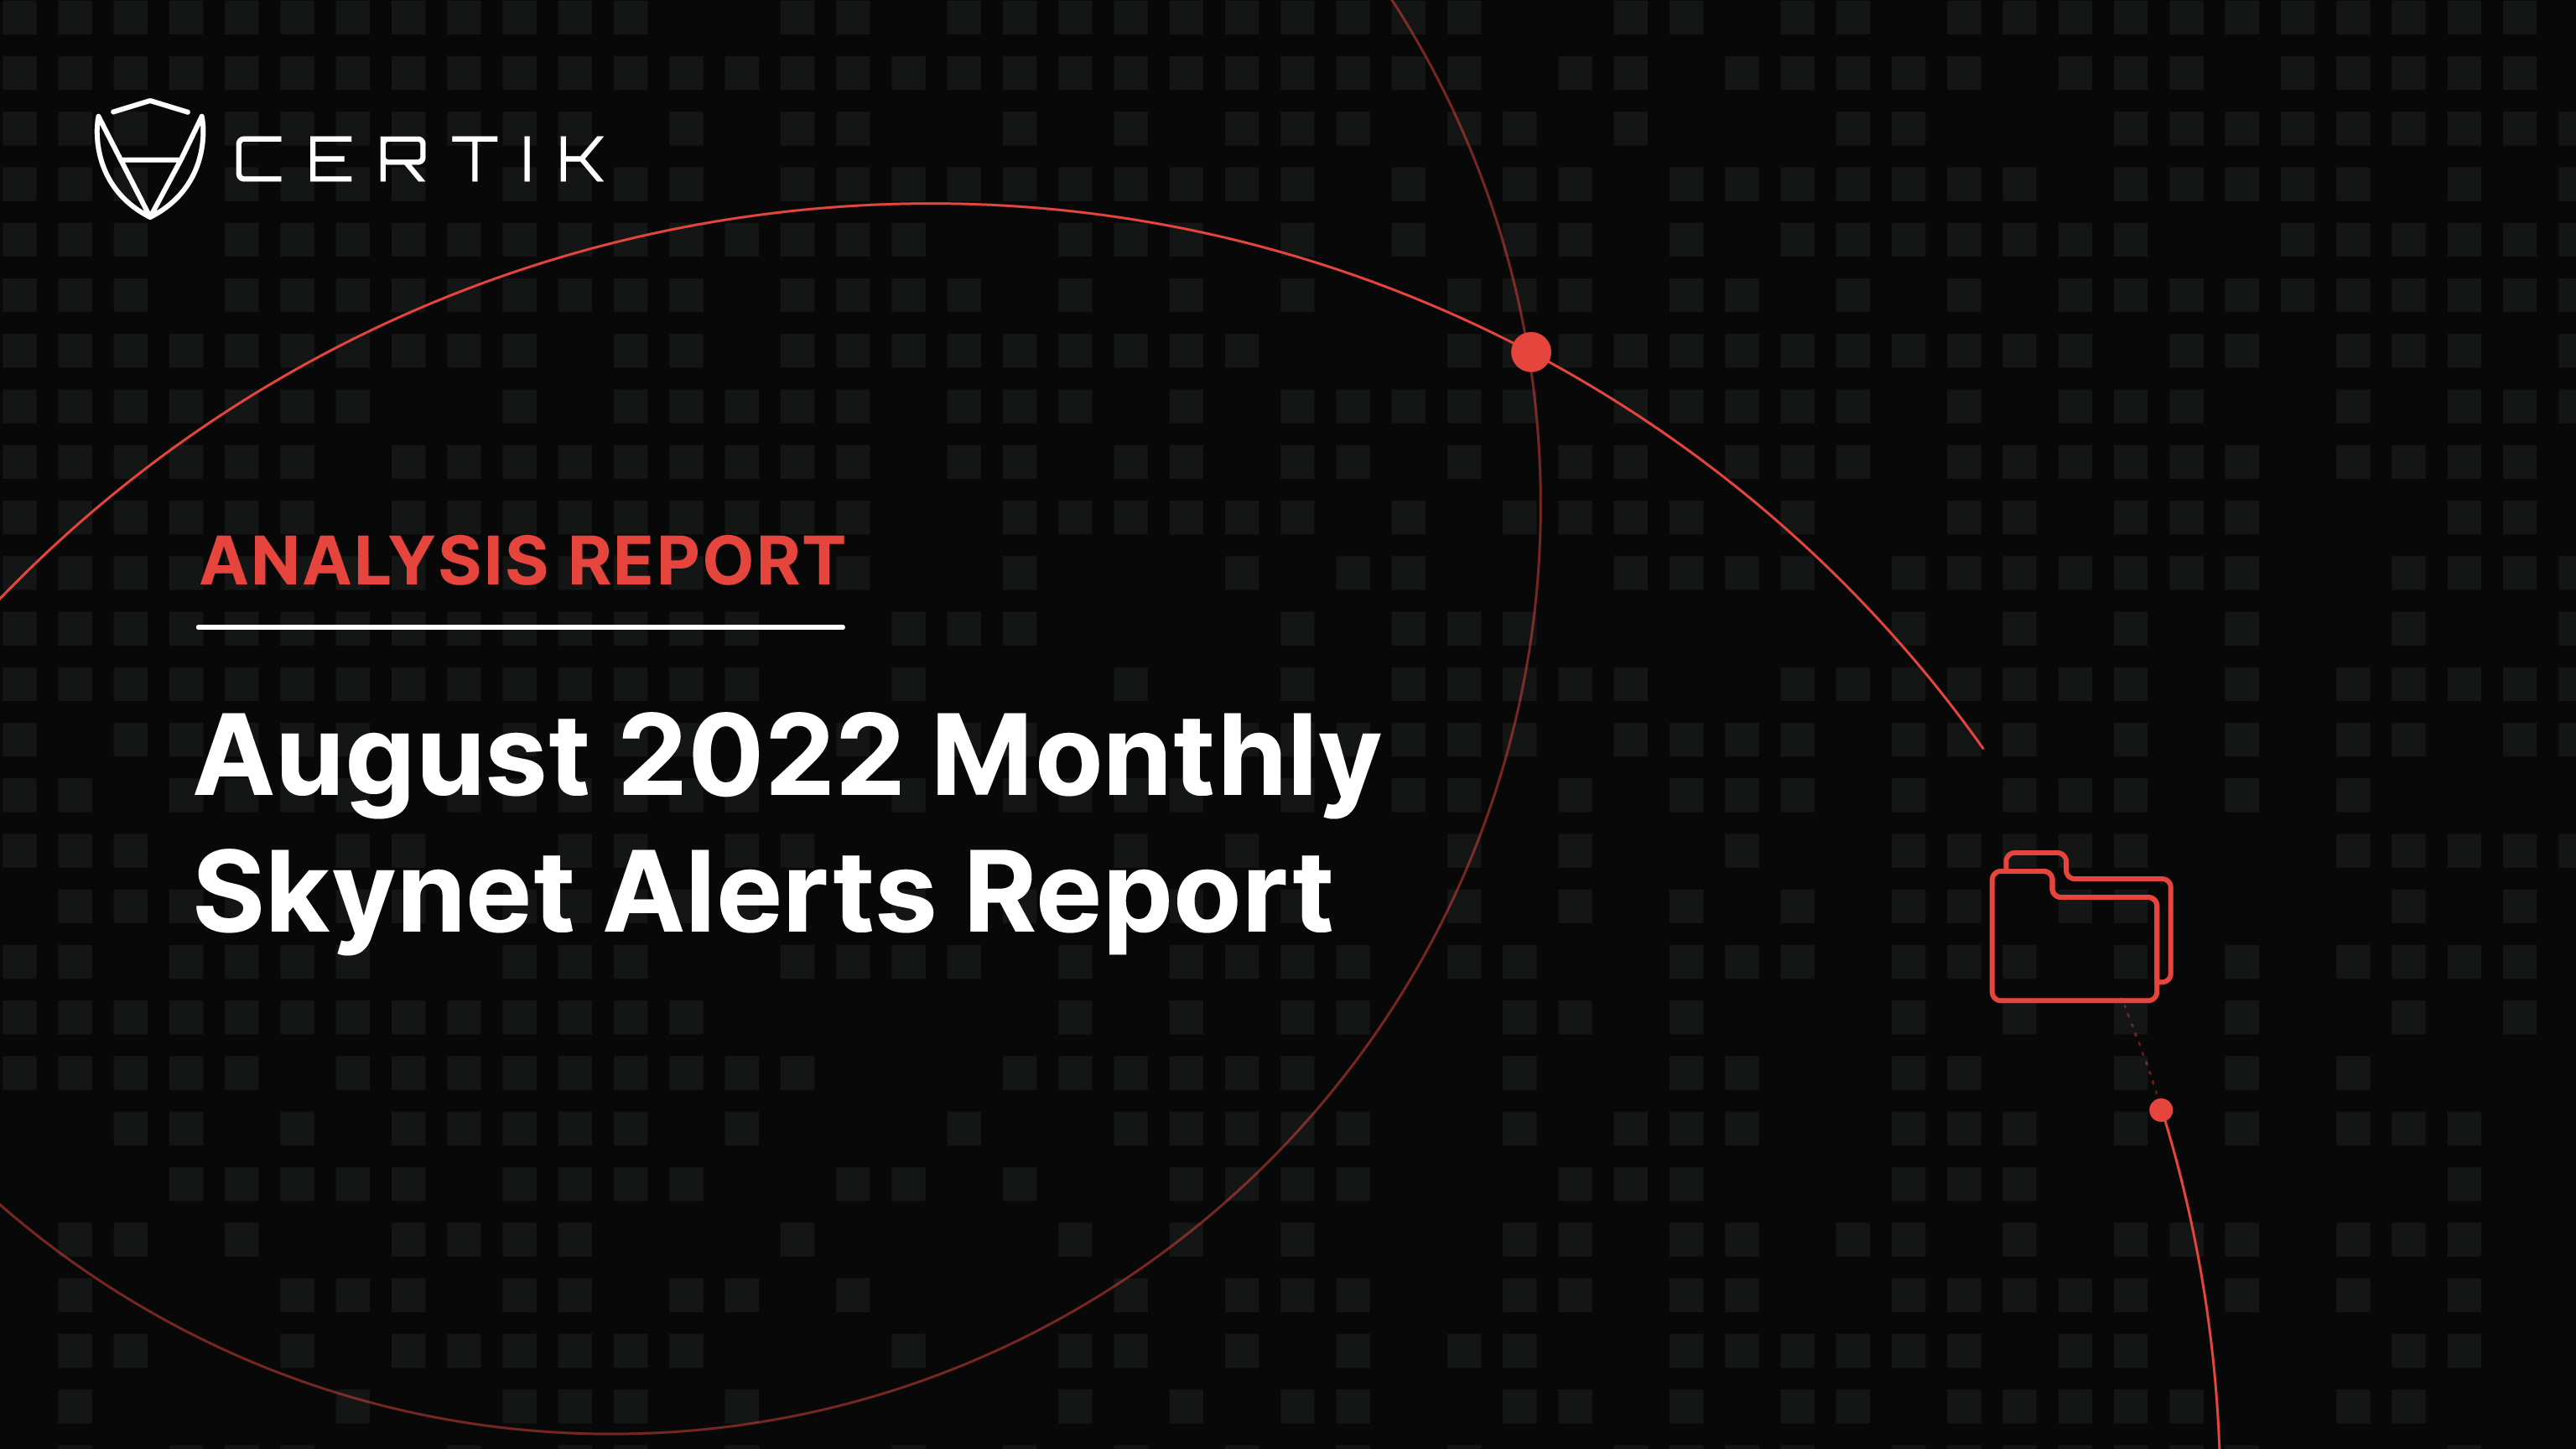 August 2022 Monthly Skynet Alerts Report